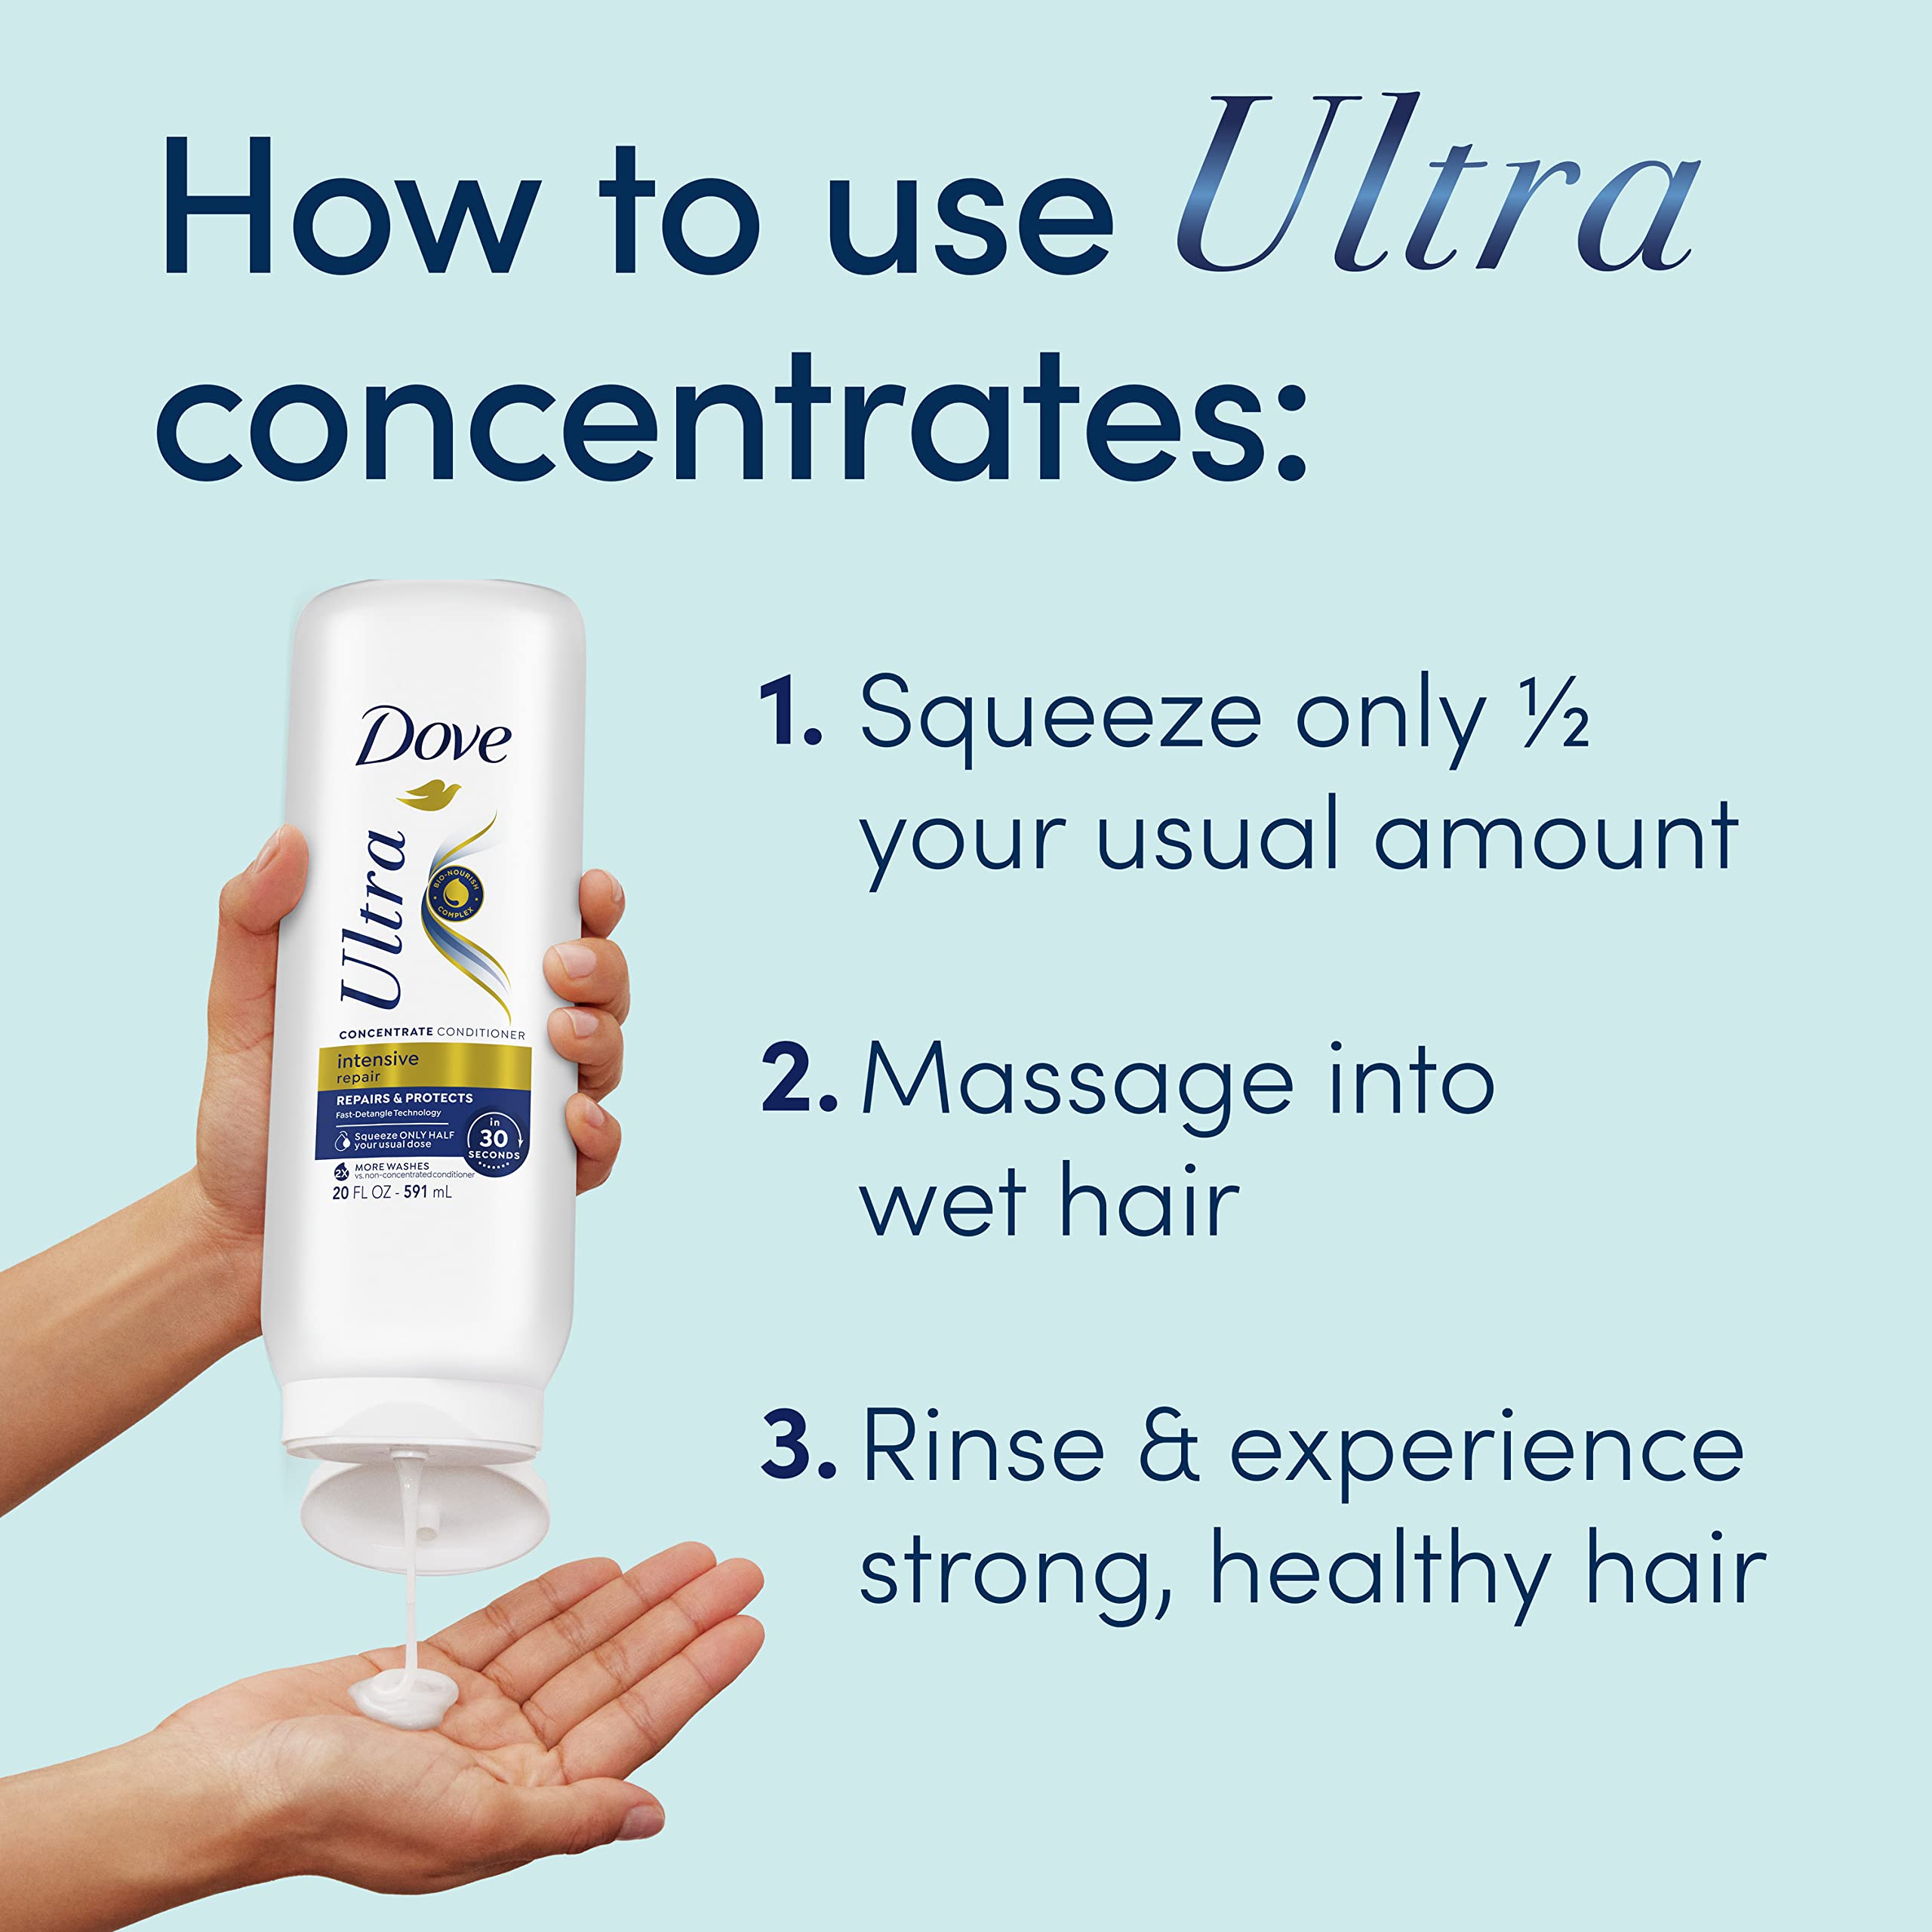 Dove Ultra Intensive Repair Concentrate Conditioner for Damaged Hair Fast Detangle Technology Repairs and Protects in 30 Seconds with 2X More Washes 20 oz